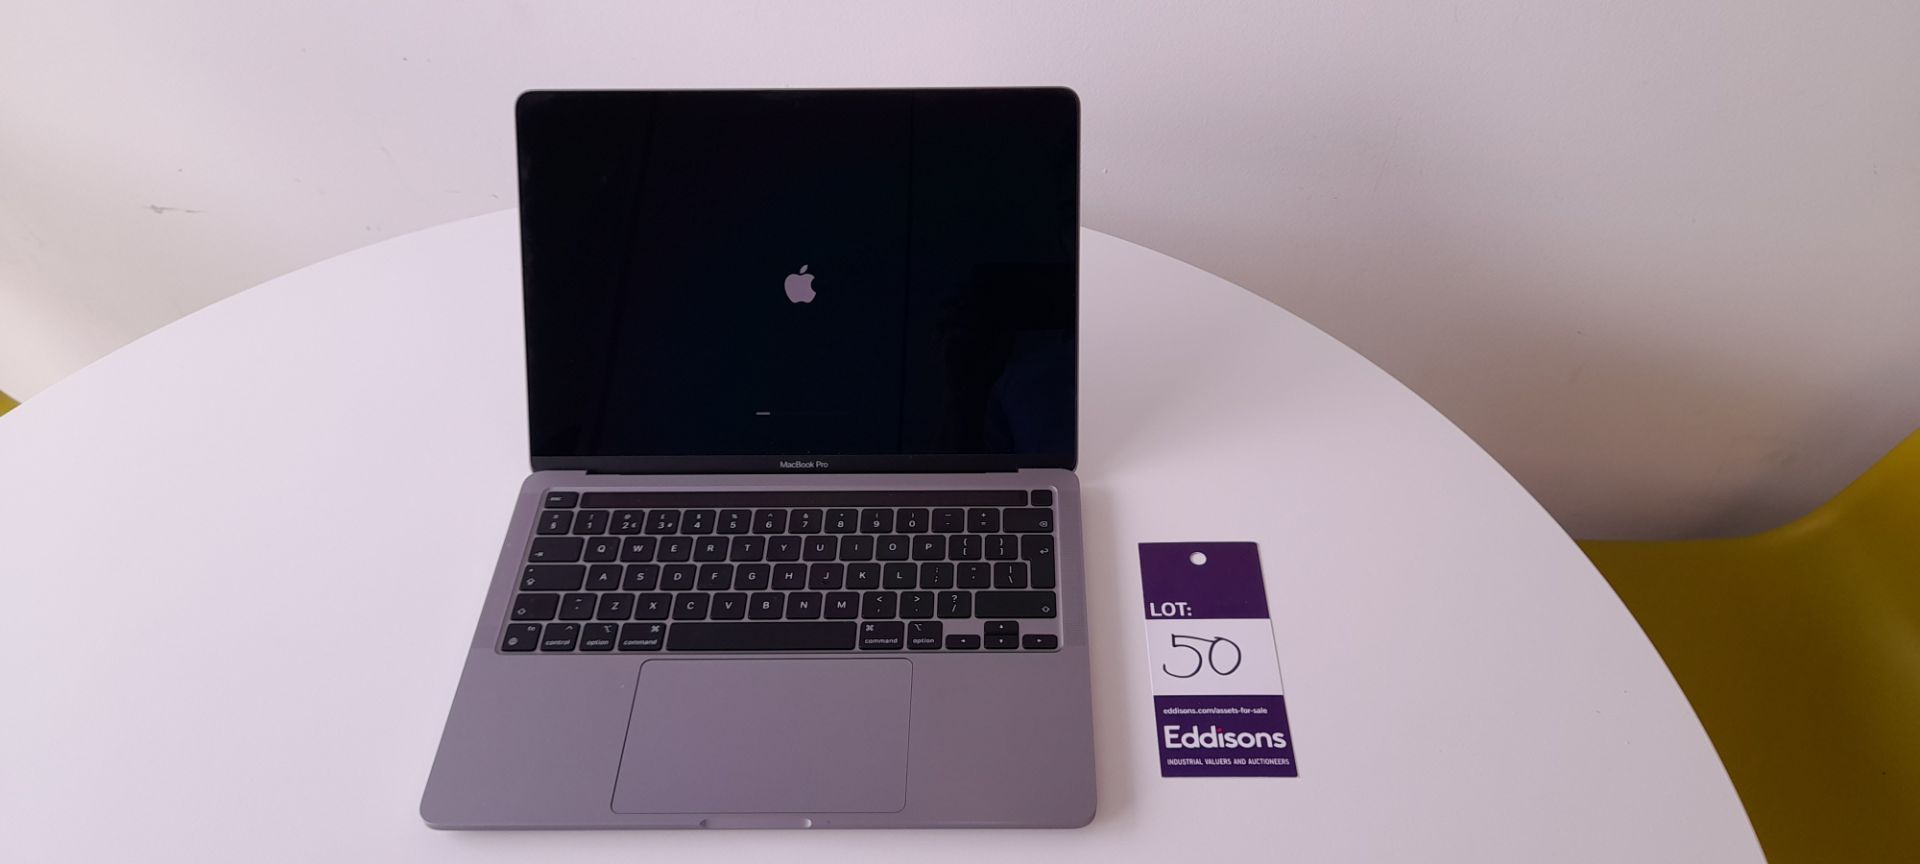 Apple MacBook Pro Model A2338 EMC3578. S/N FVFGXTD4Q05. Collection from Canary Wharf, London, E14 - Image 2 of 7